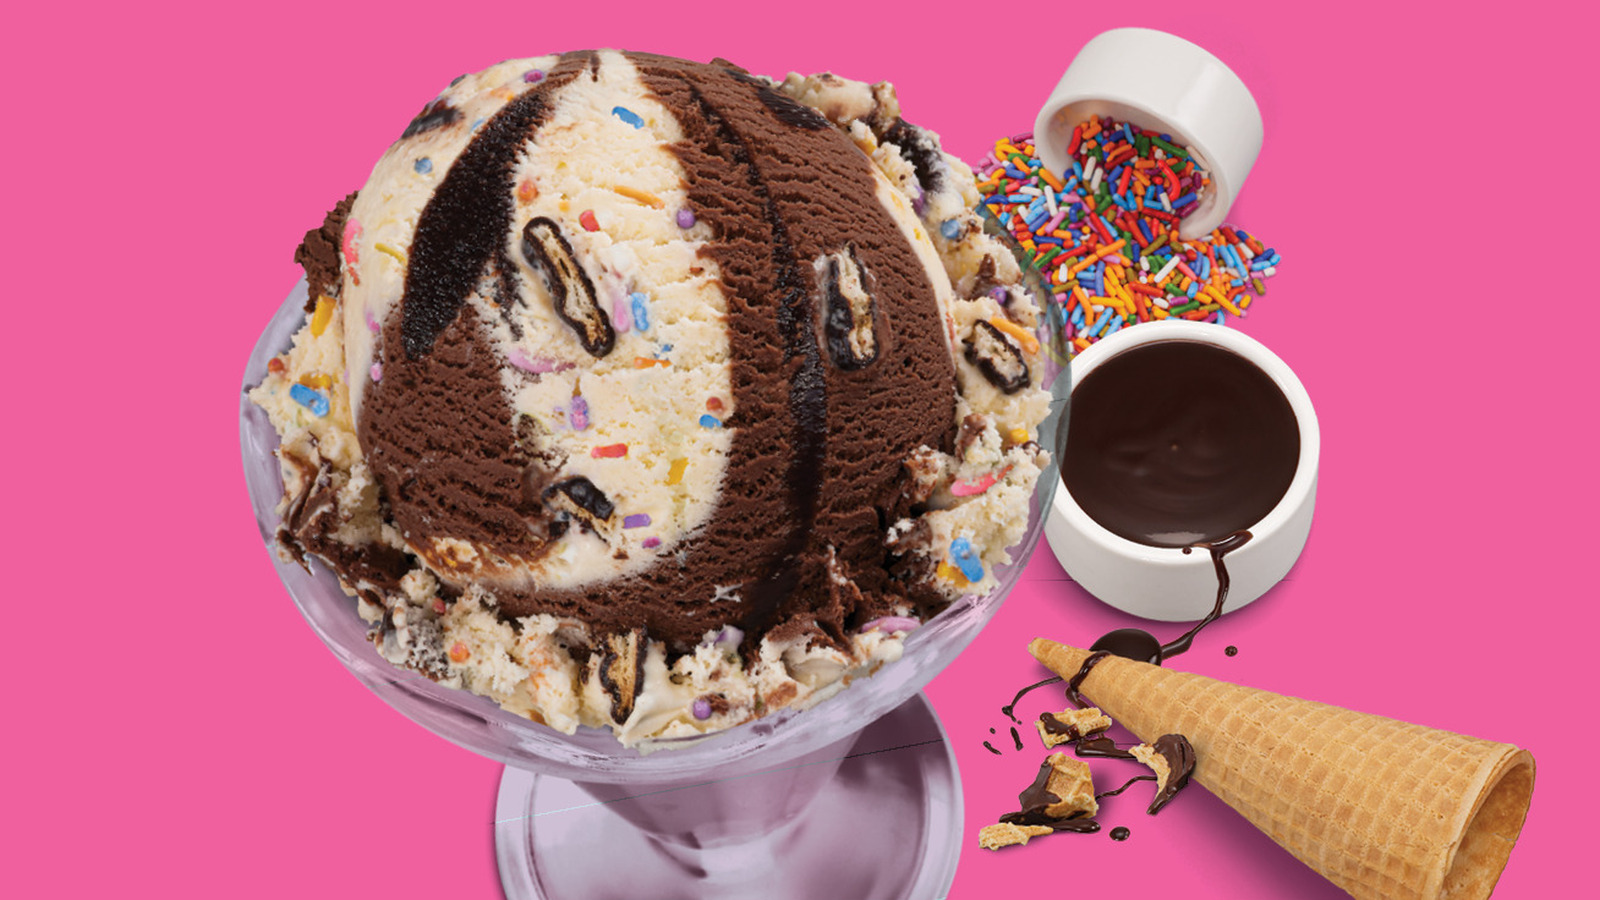 Baskin-Robbins’ July Ice Cream Puts A New Spin On Your Sundae – The Daily Meal